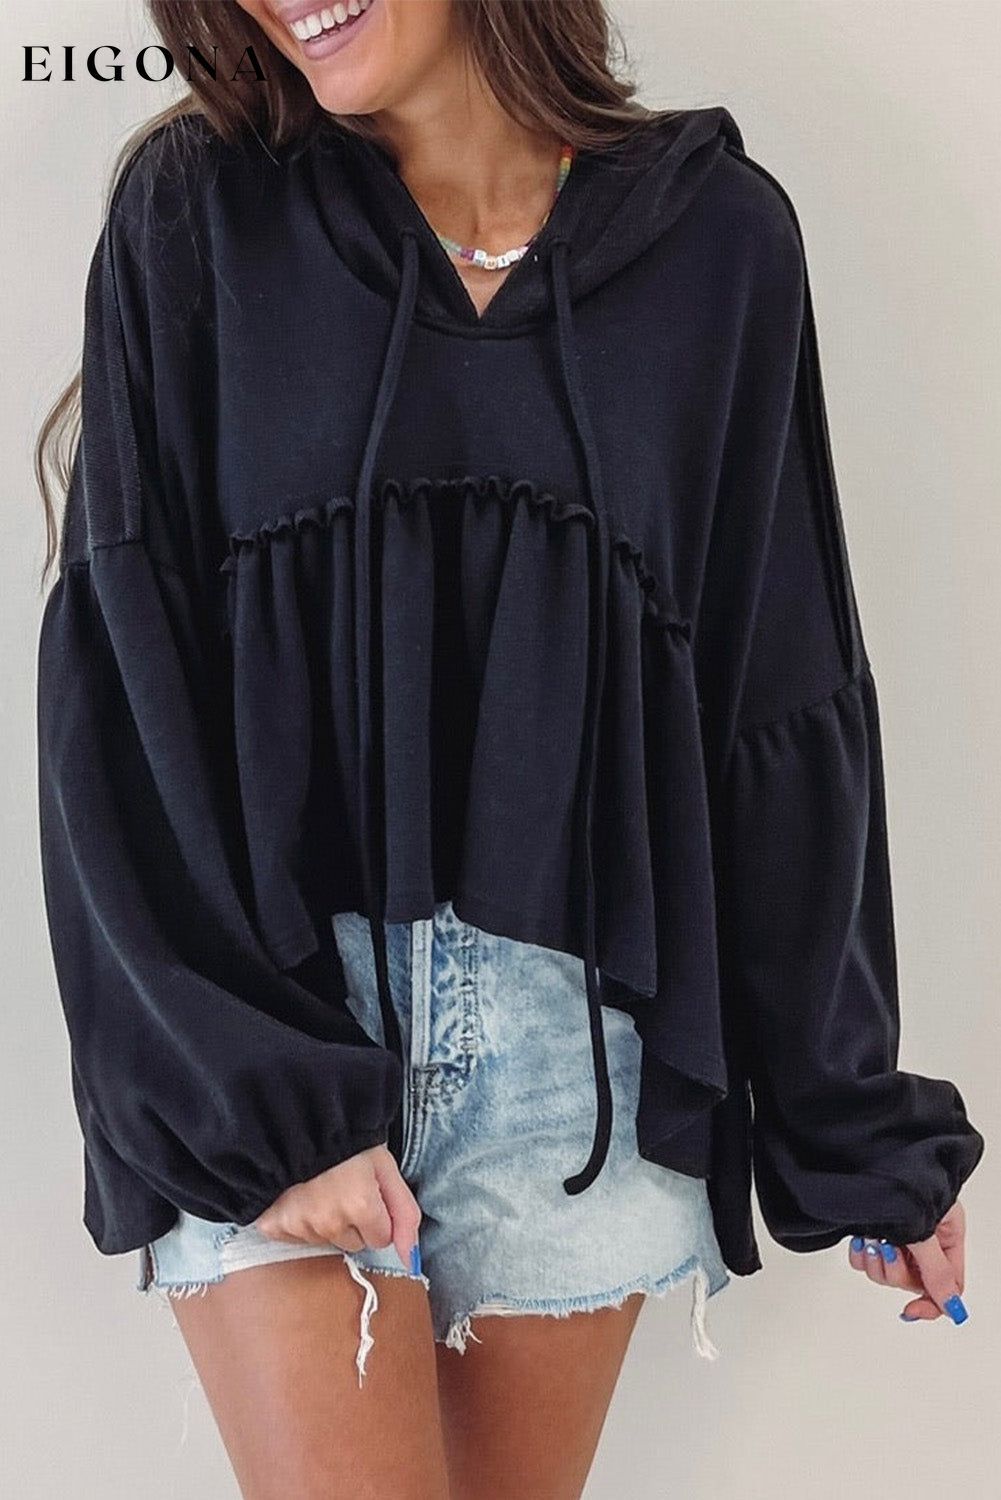 Black Oversized Ruffled High Low Hem Drop Shoulder Hoodie All In Stock clothes long sleeve top Occasion Daily Print Solid Color Season Spring Style Casual sweater sweaters top tops